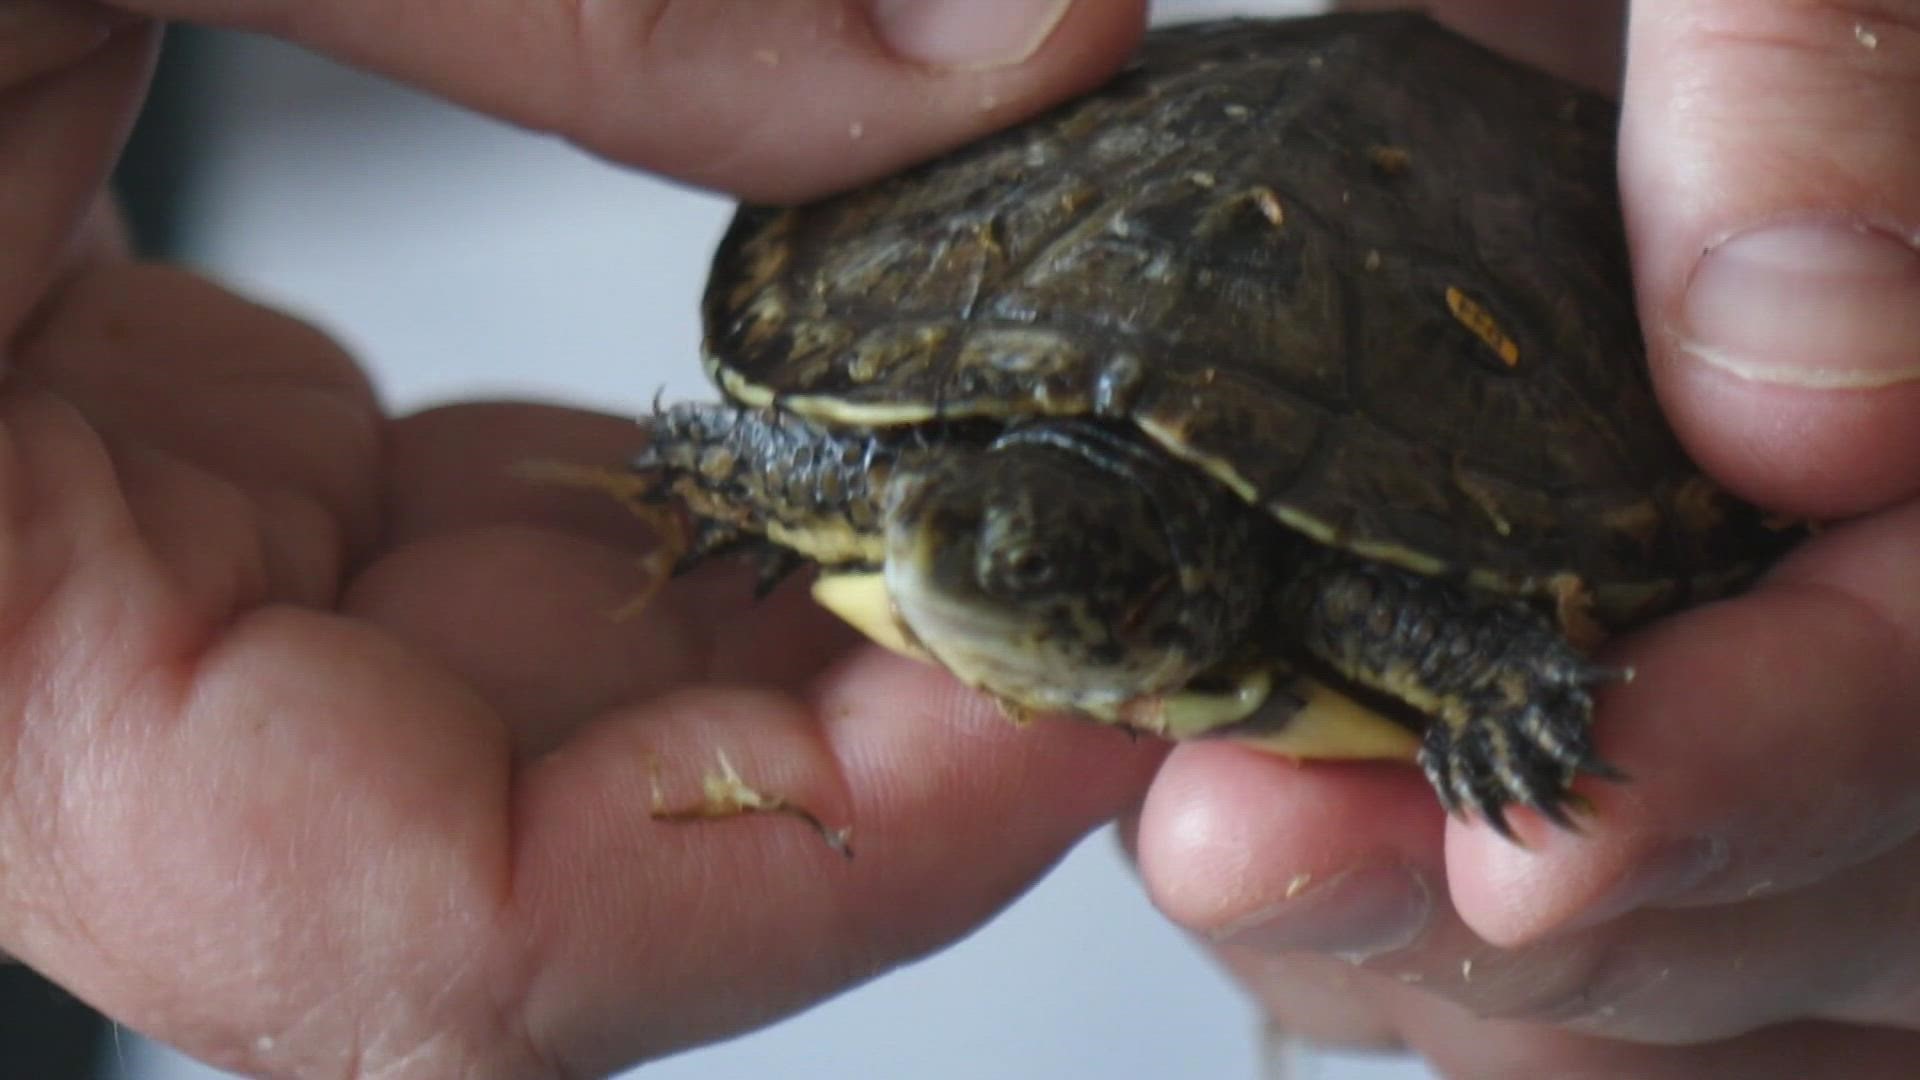 More than 30 western pond turtles were carefully prepared for their release on Friday at a protected property outside of Tacoma.